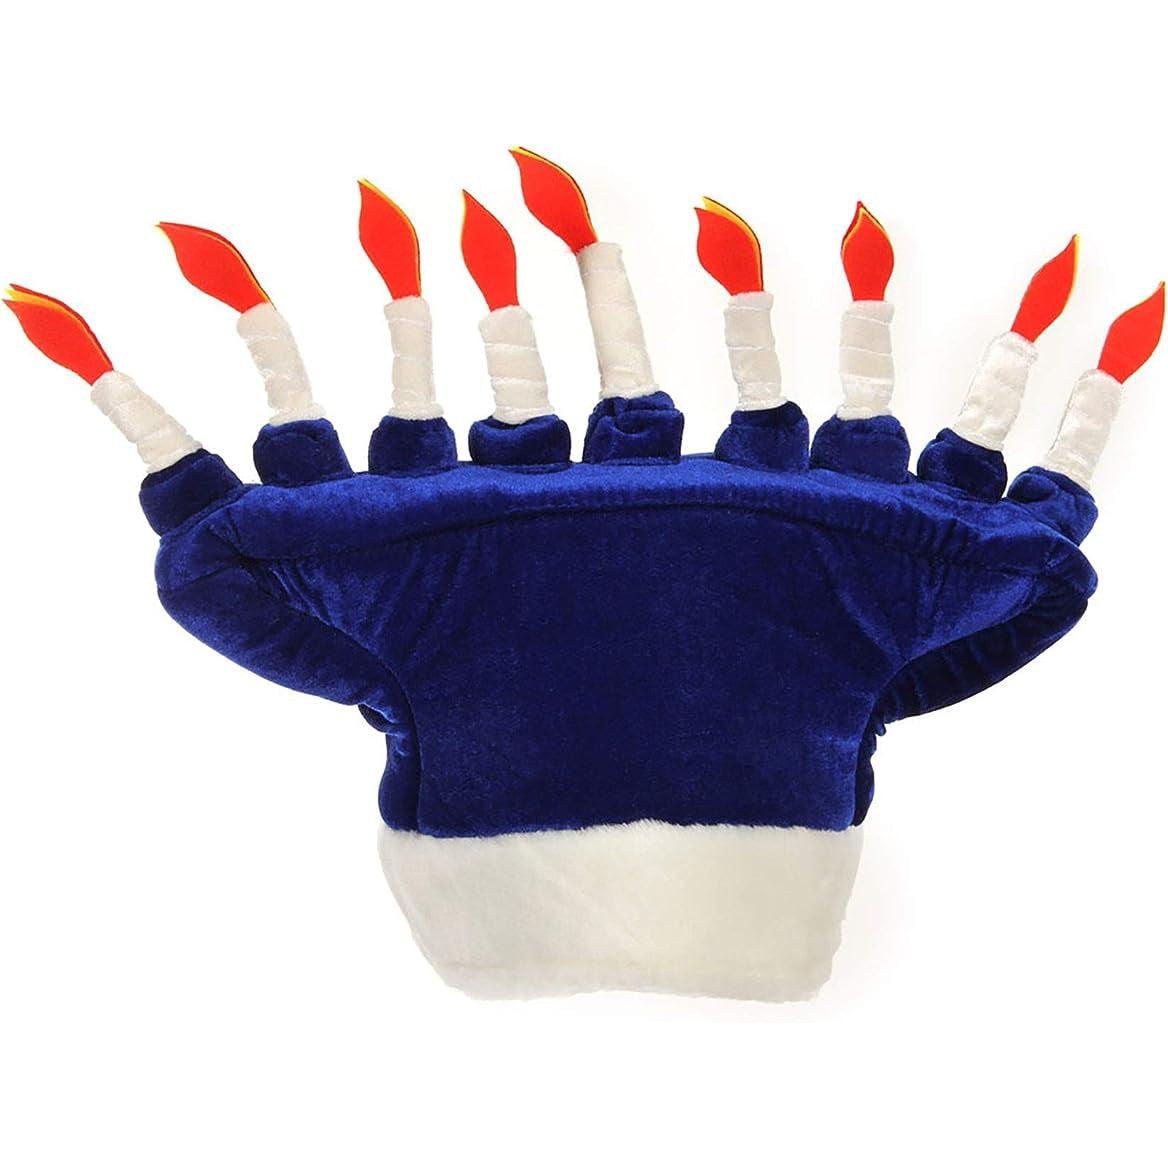 Back view of the Chanukah plush hat.